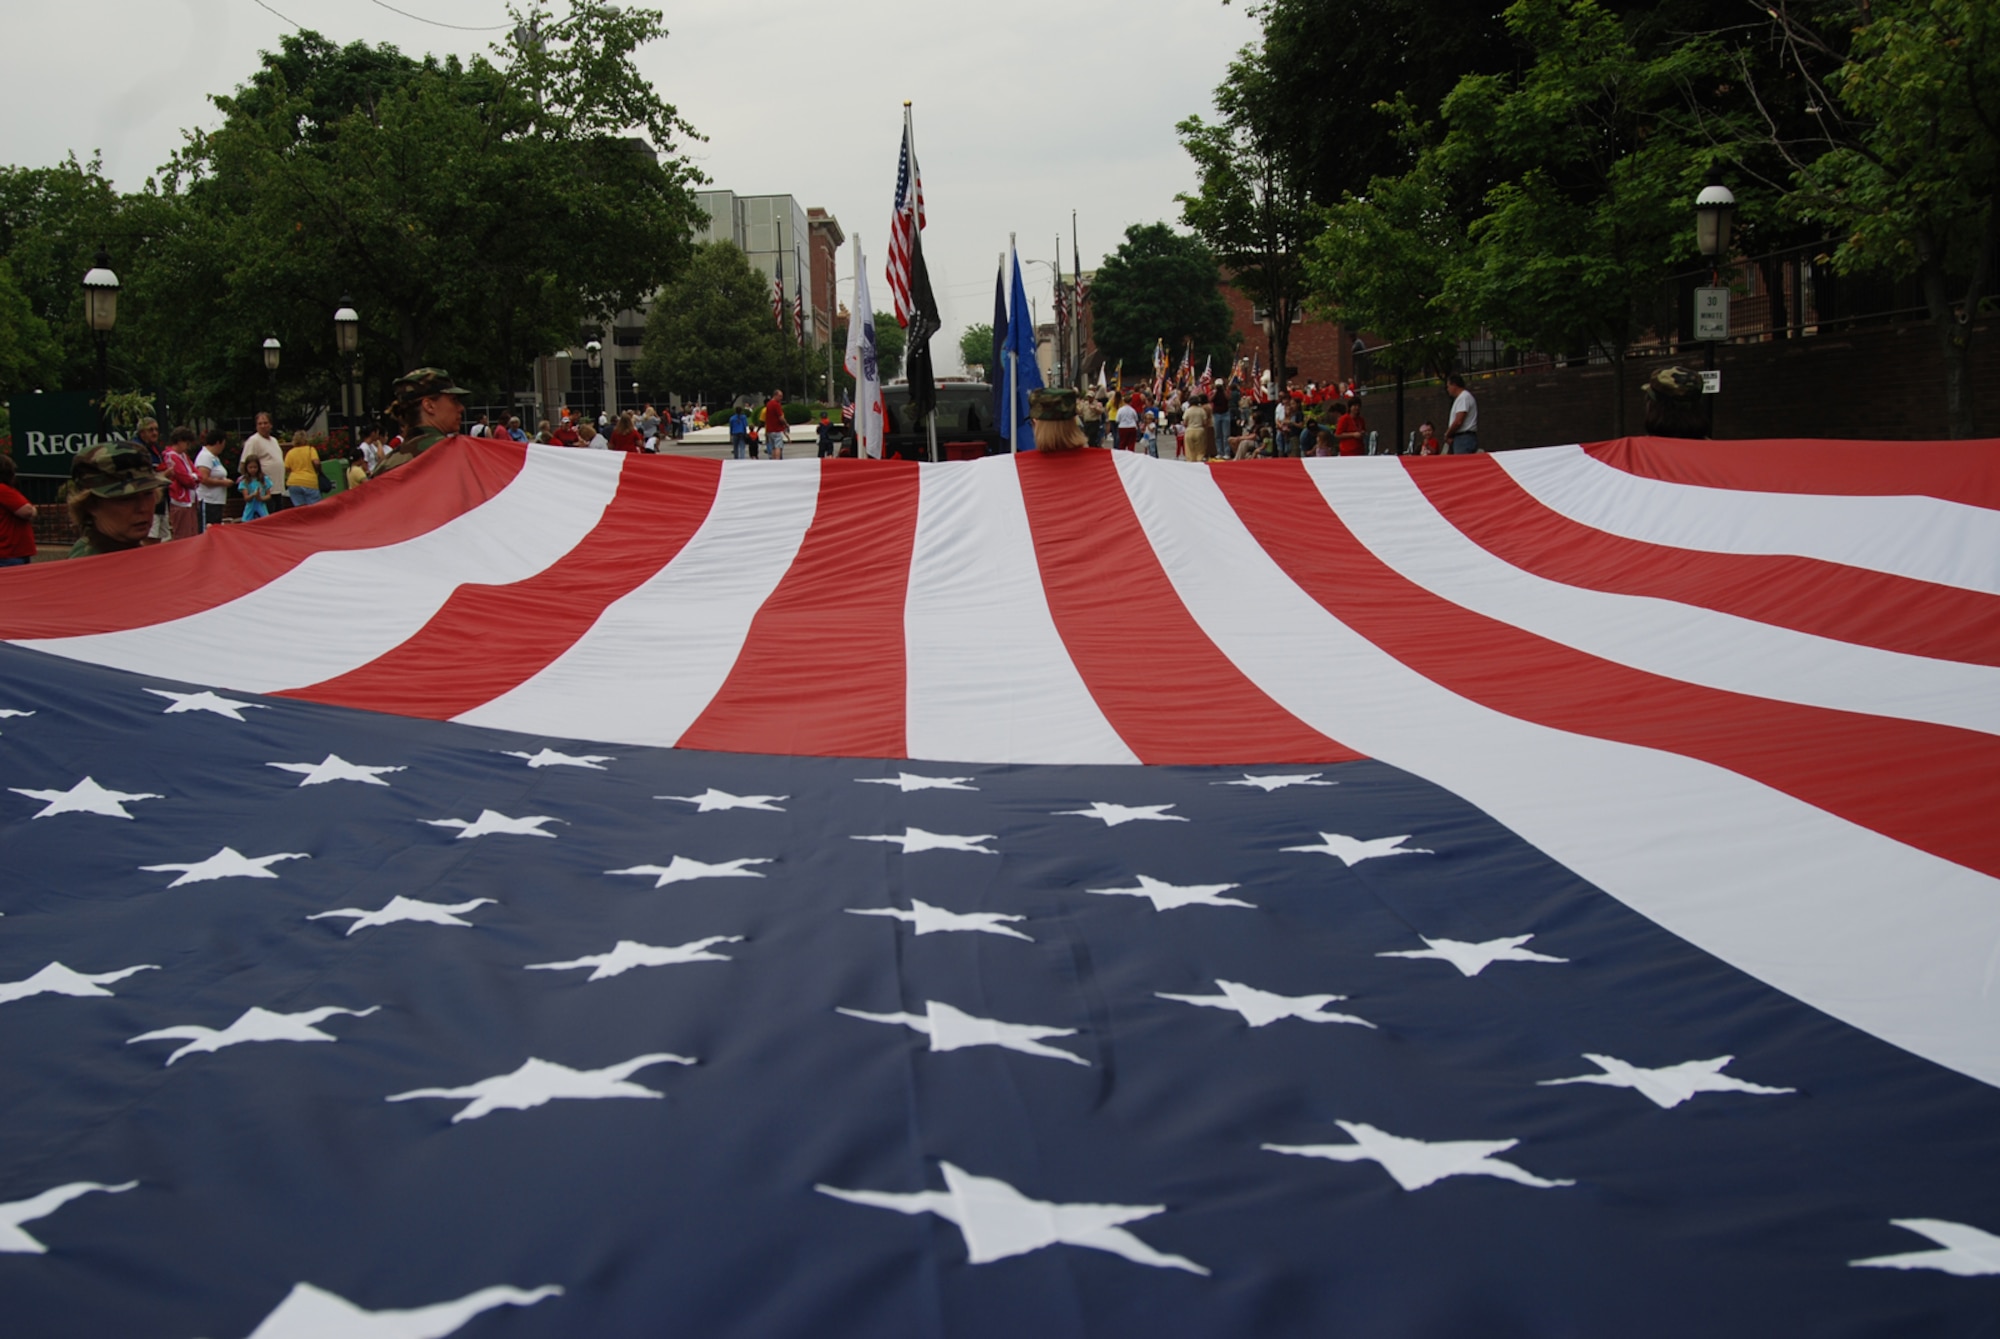 Members of the 932nd Airlift Wing approach the center of Belleville as they march in the 2007 Belleville Memorial Day parade.